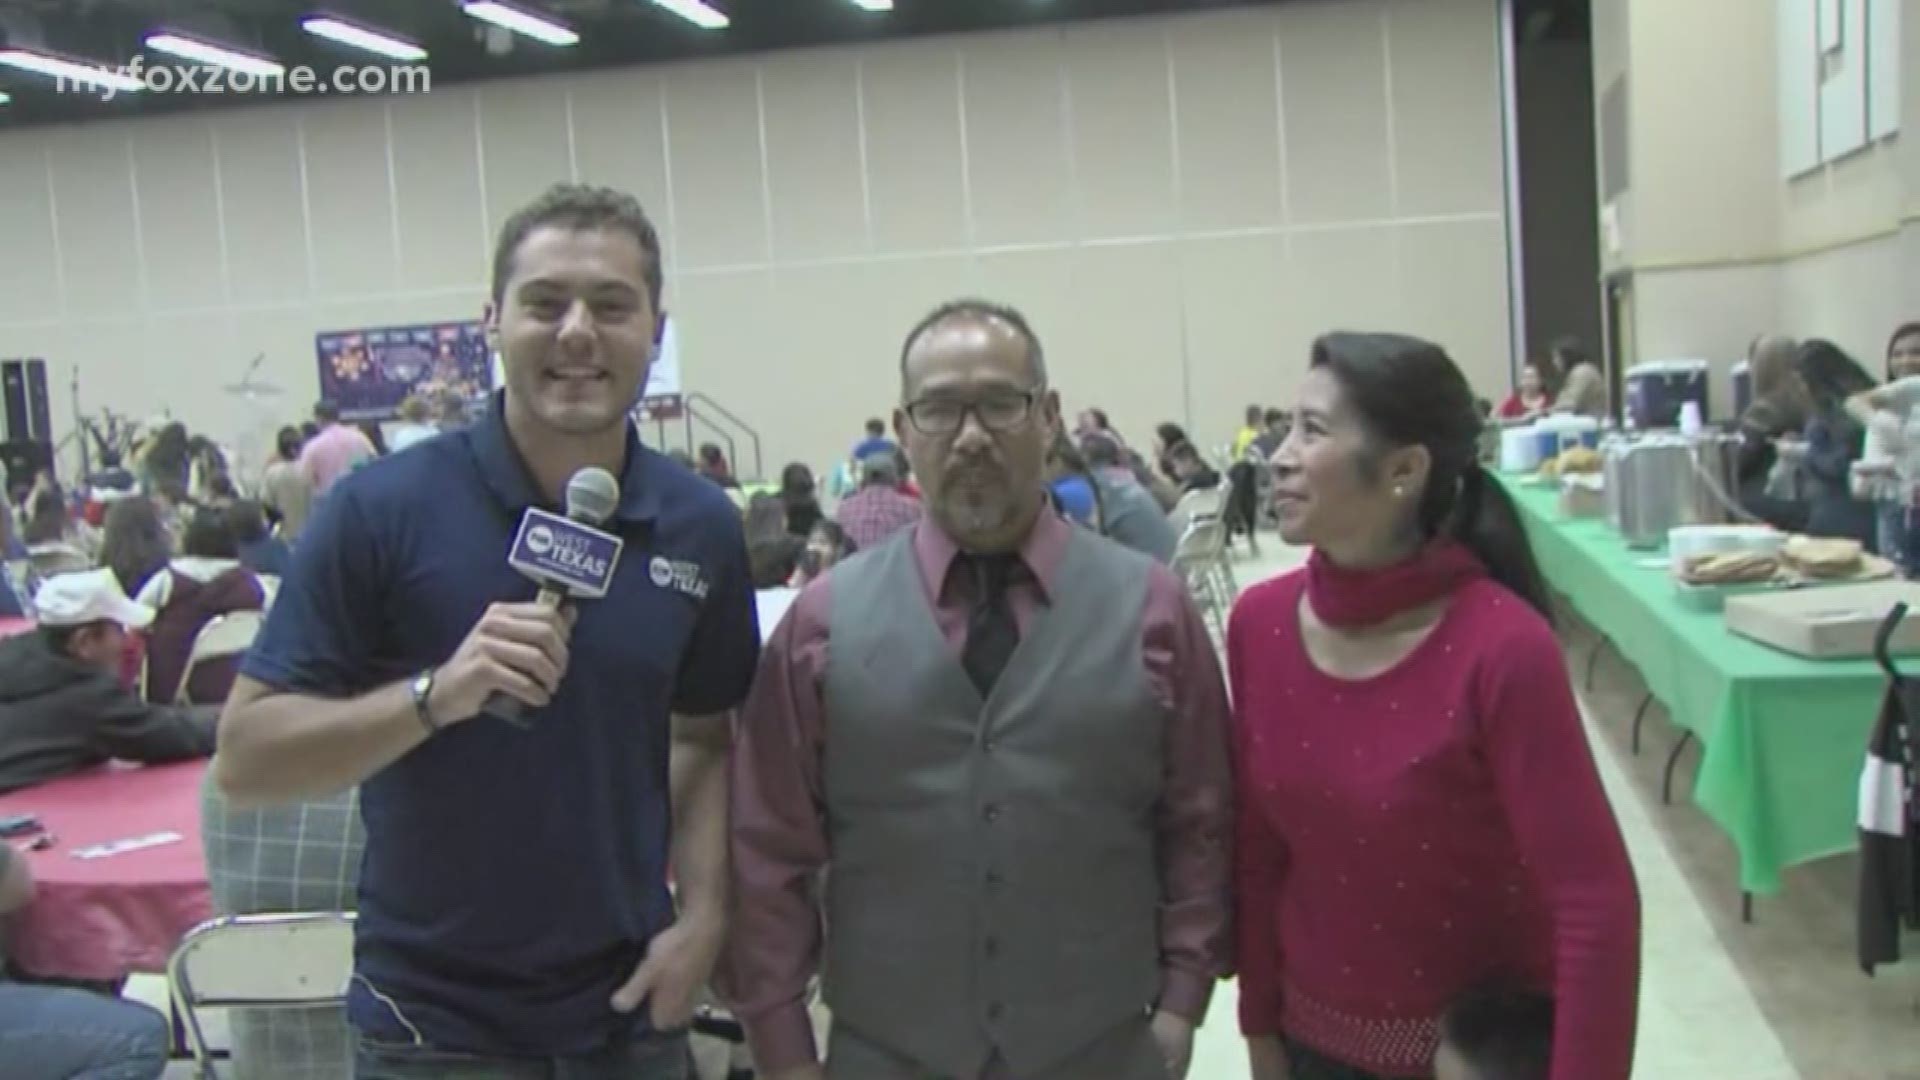 The 18th annual Christmas Posada was held in San Angelo Friday Night. Meteorologist Joe DeCarlo was live on location for the Rundown.